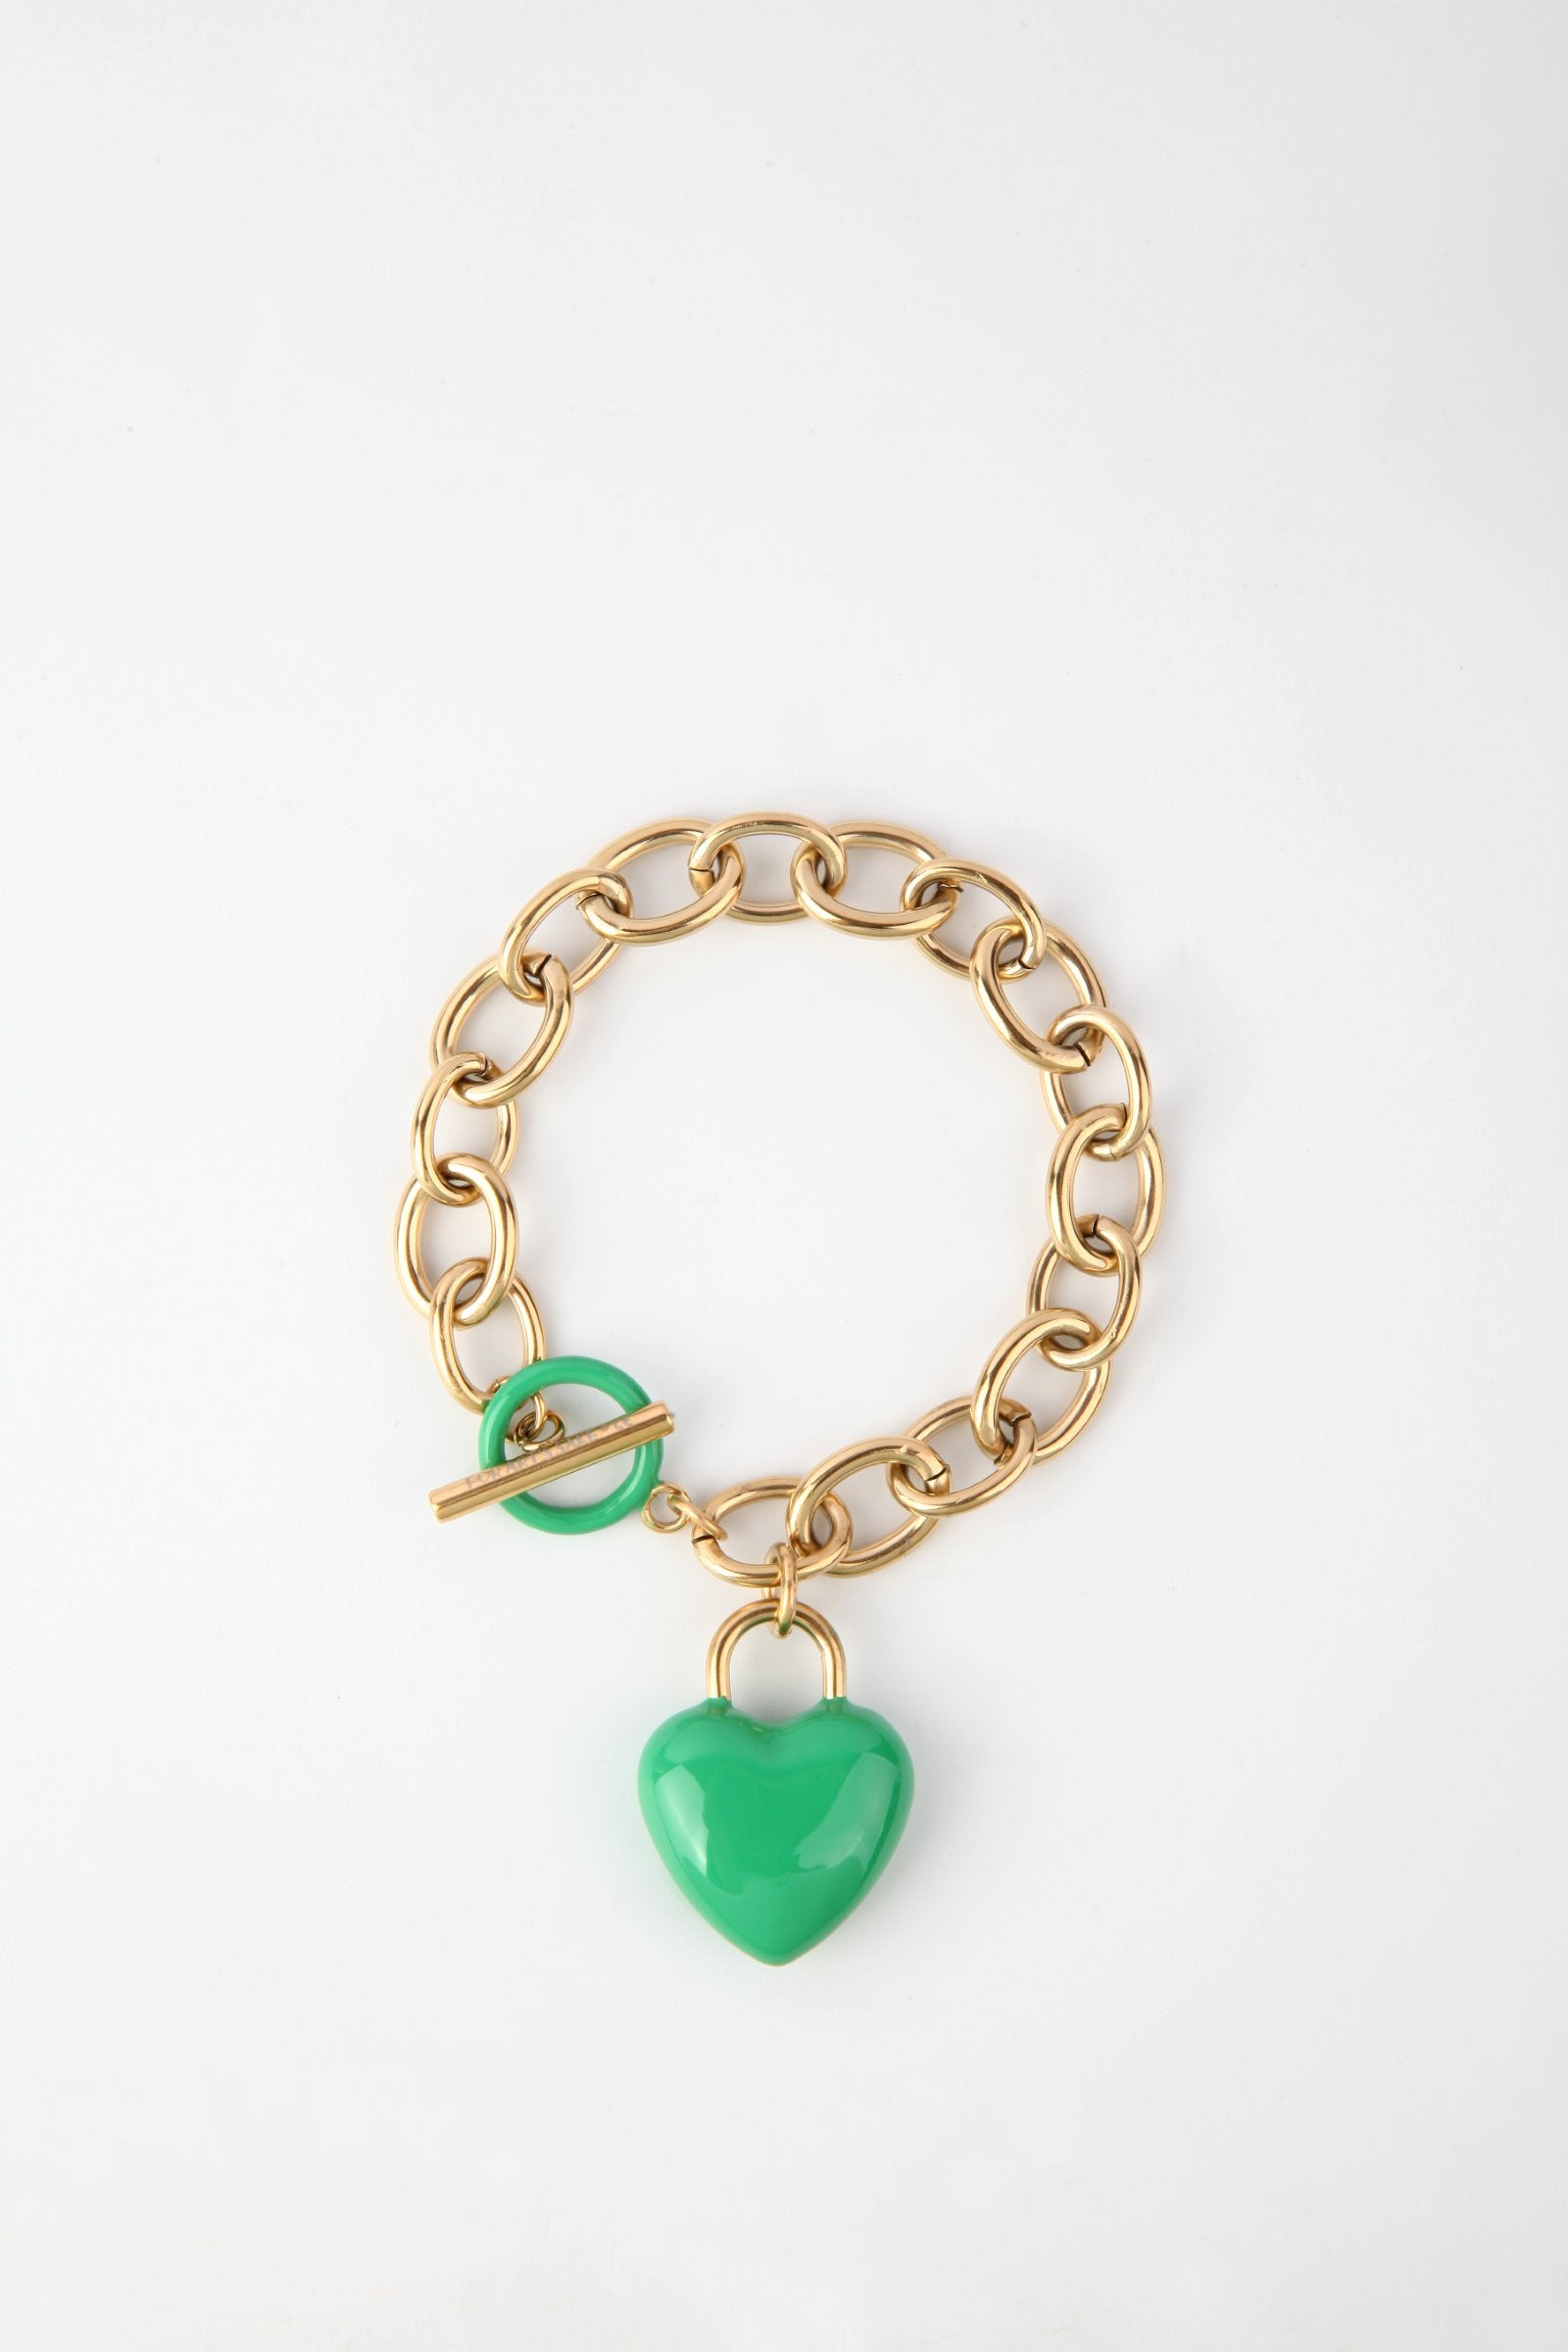 A pendant bracelet with large, interconnected 18k gold links is shown on a white background. It features a toggle clasp and an enamel-covered green heart-shaped charm. This is "The Kiss Bracelet" by For Art's Sake®.